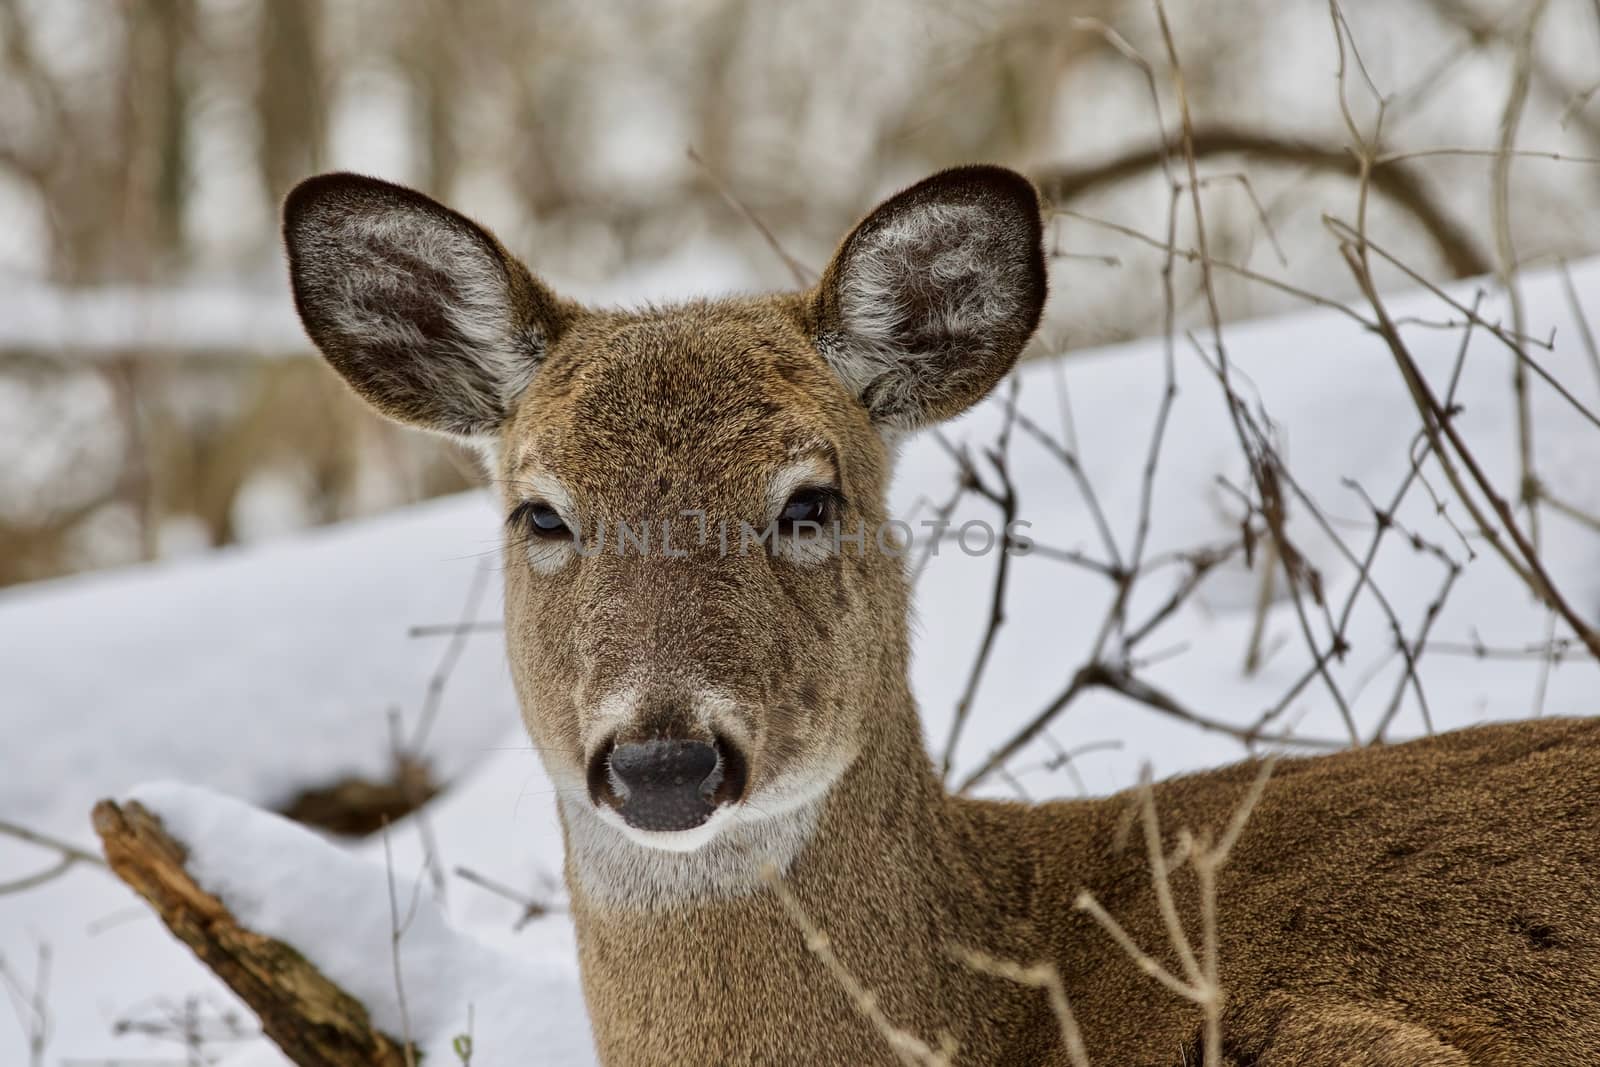 Beautiful image of a wild deer in the snowy forest by teo